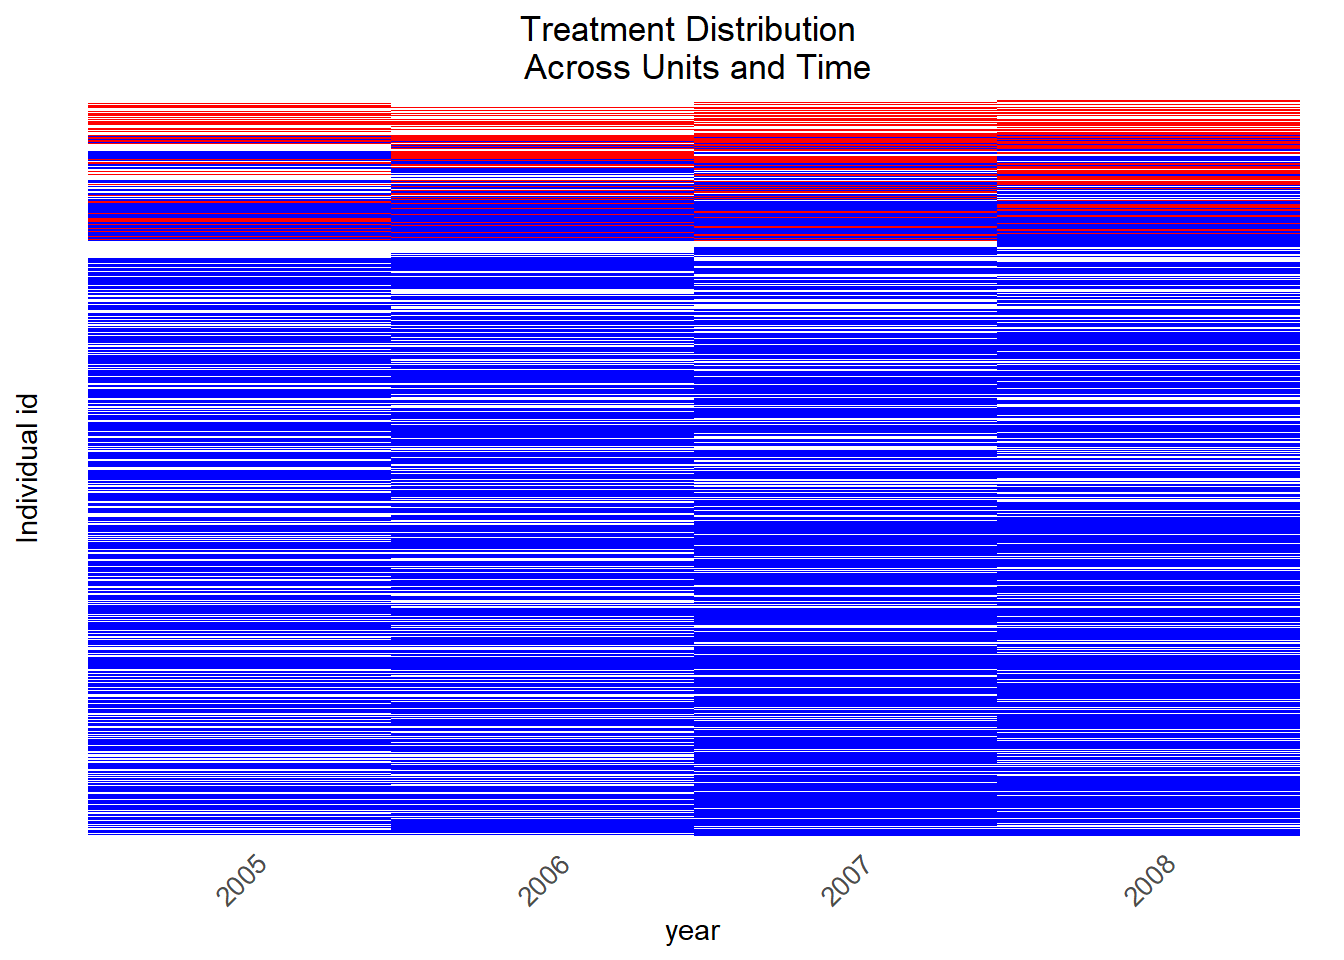 Visualization of treated observations across time, across units